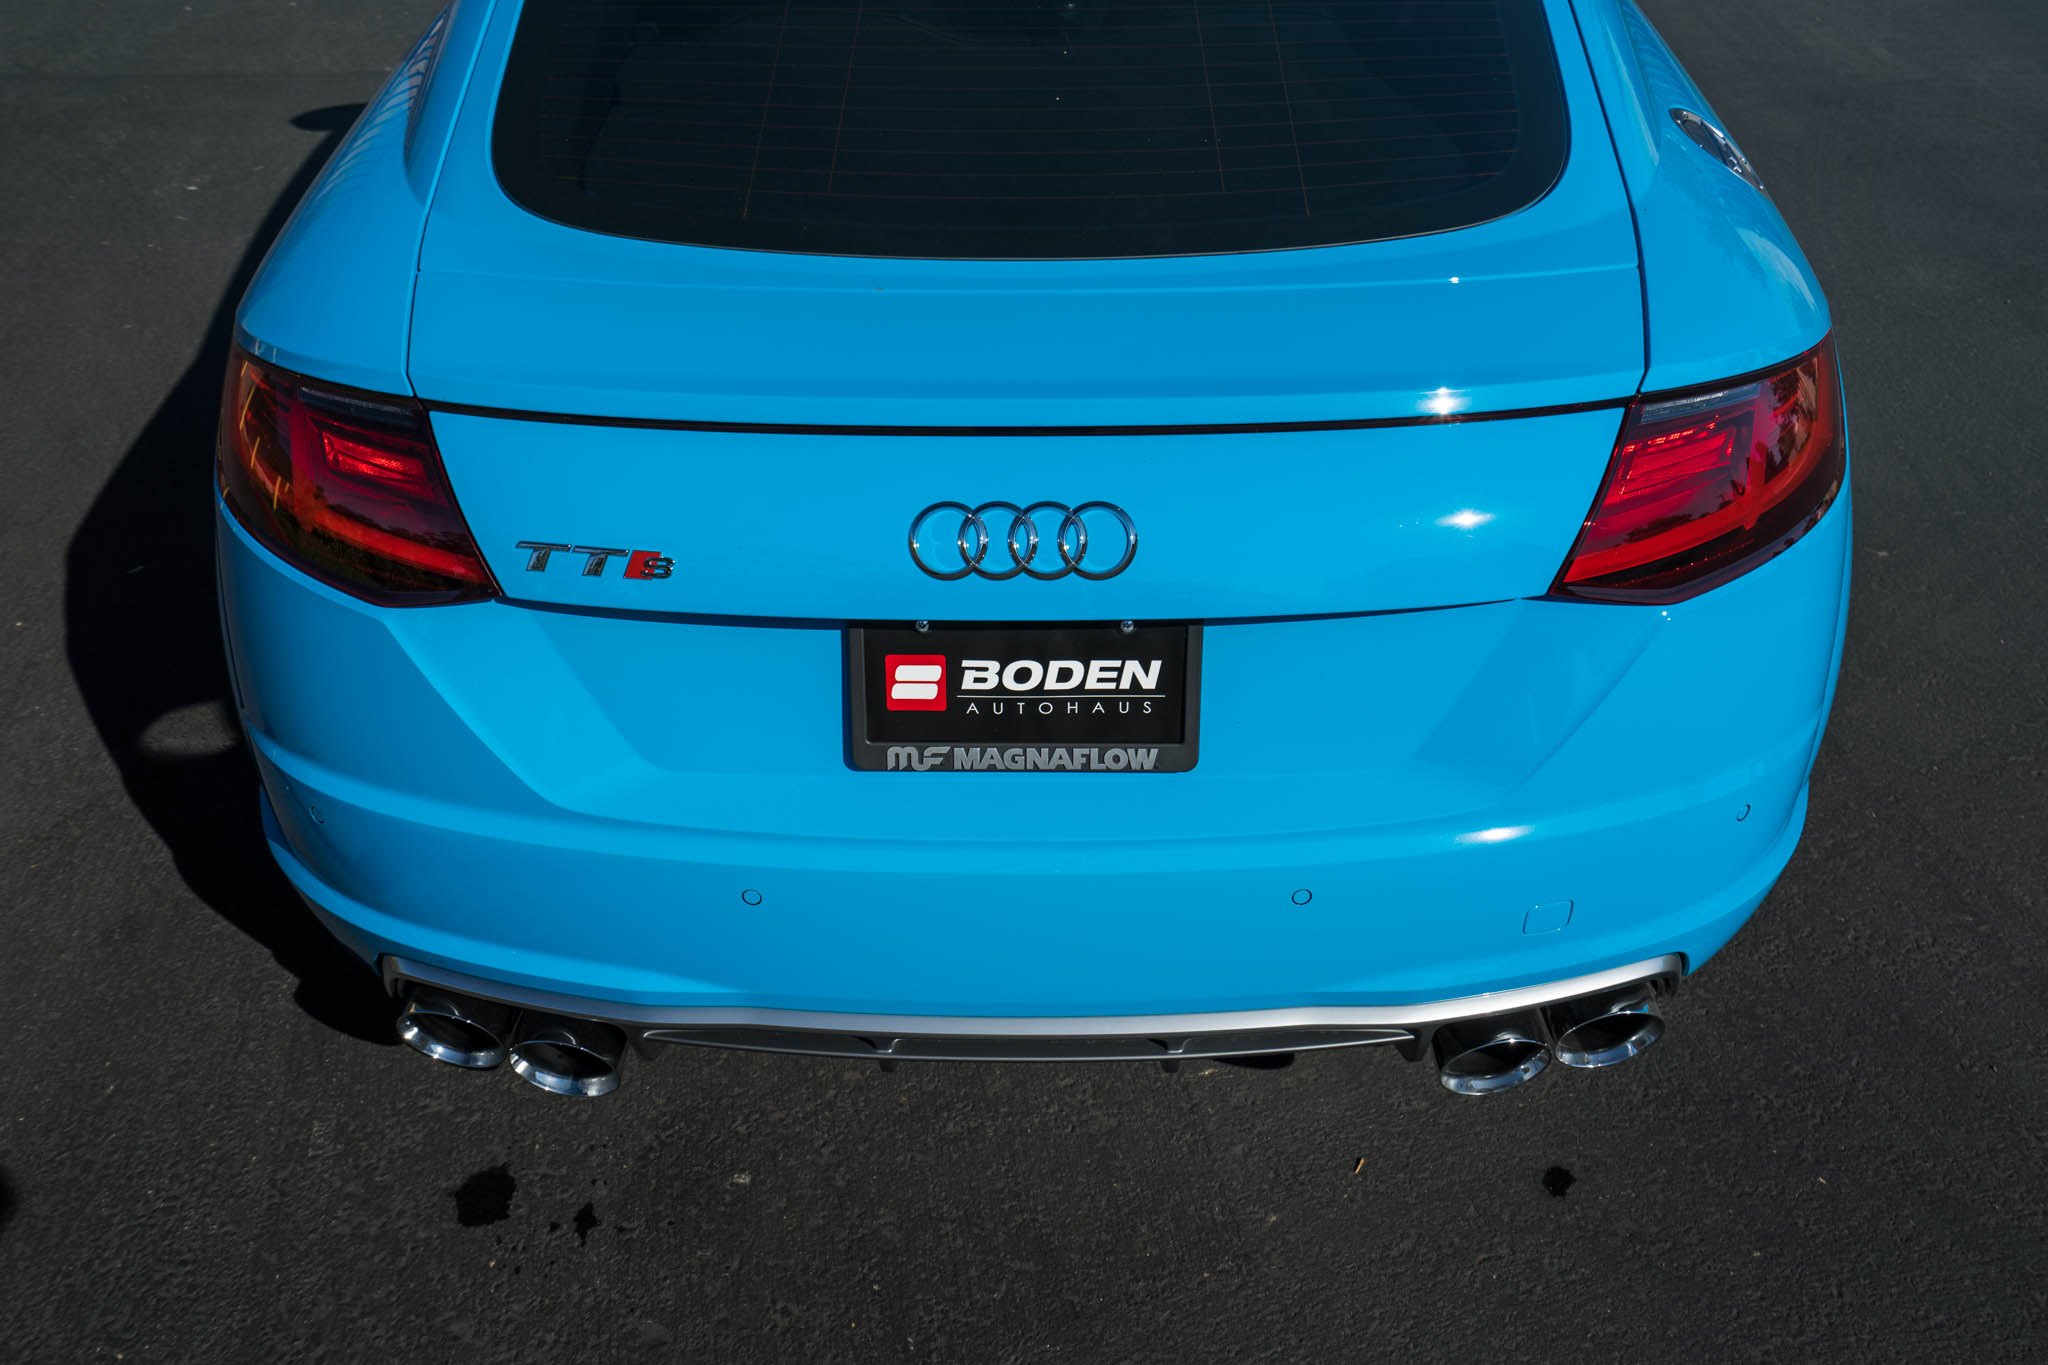 Red LED Taillights on Blue Audi TT S - Photo by Boden Autohaus